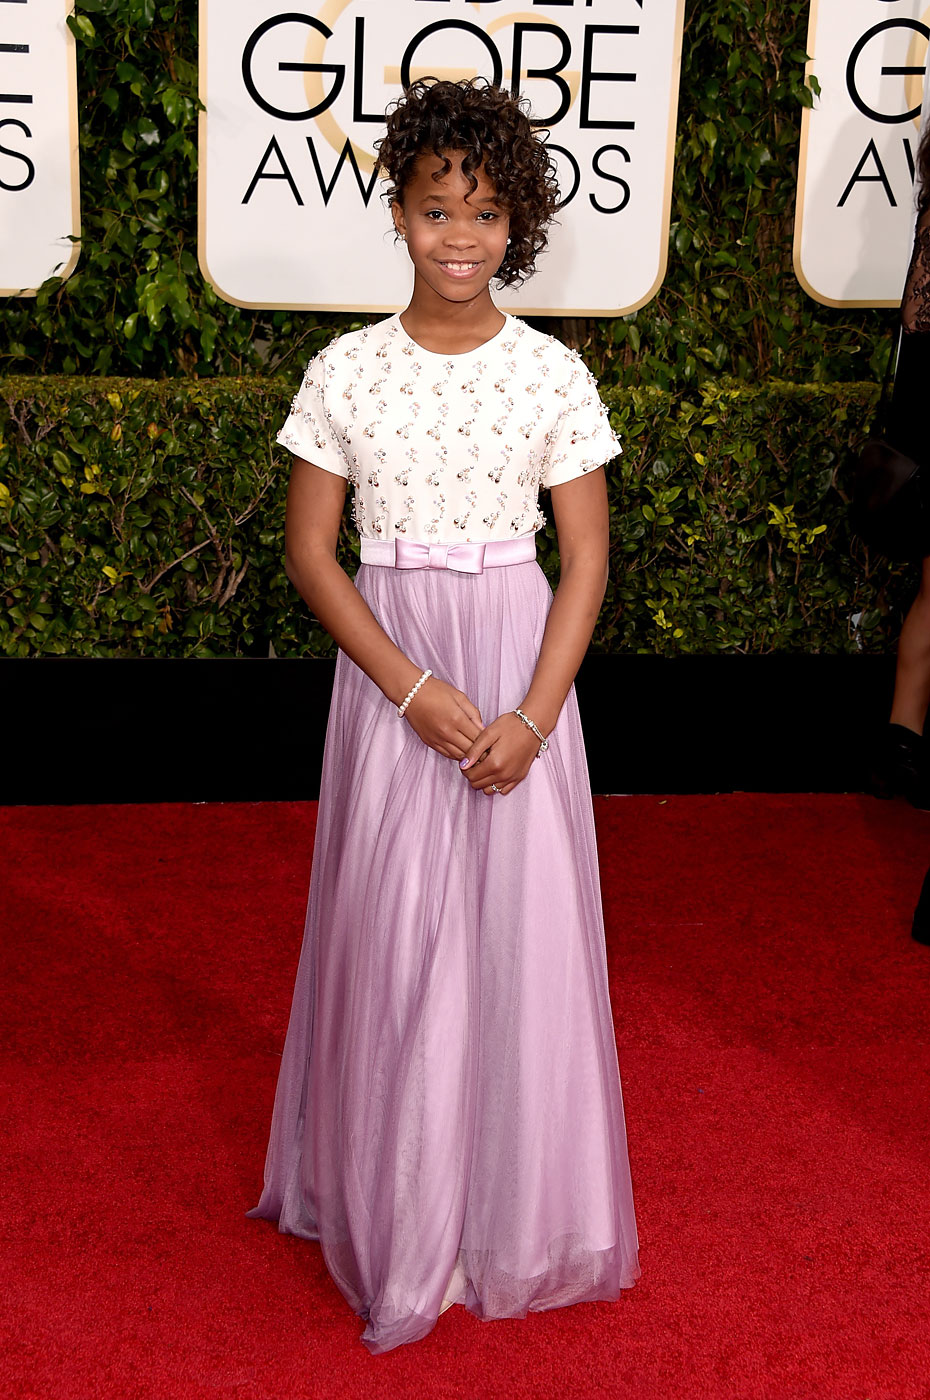 Quvenzhane Wallis attends the 72nd Annual Golden Globe Awards at The Beverly Hilton Hotel on Jan. 11, 2015 in Beverly Hills, Calif.